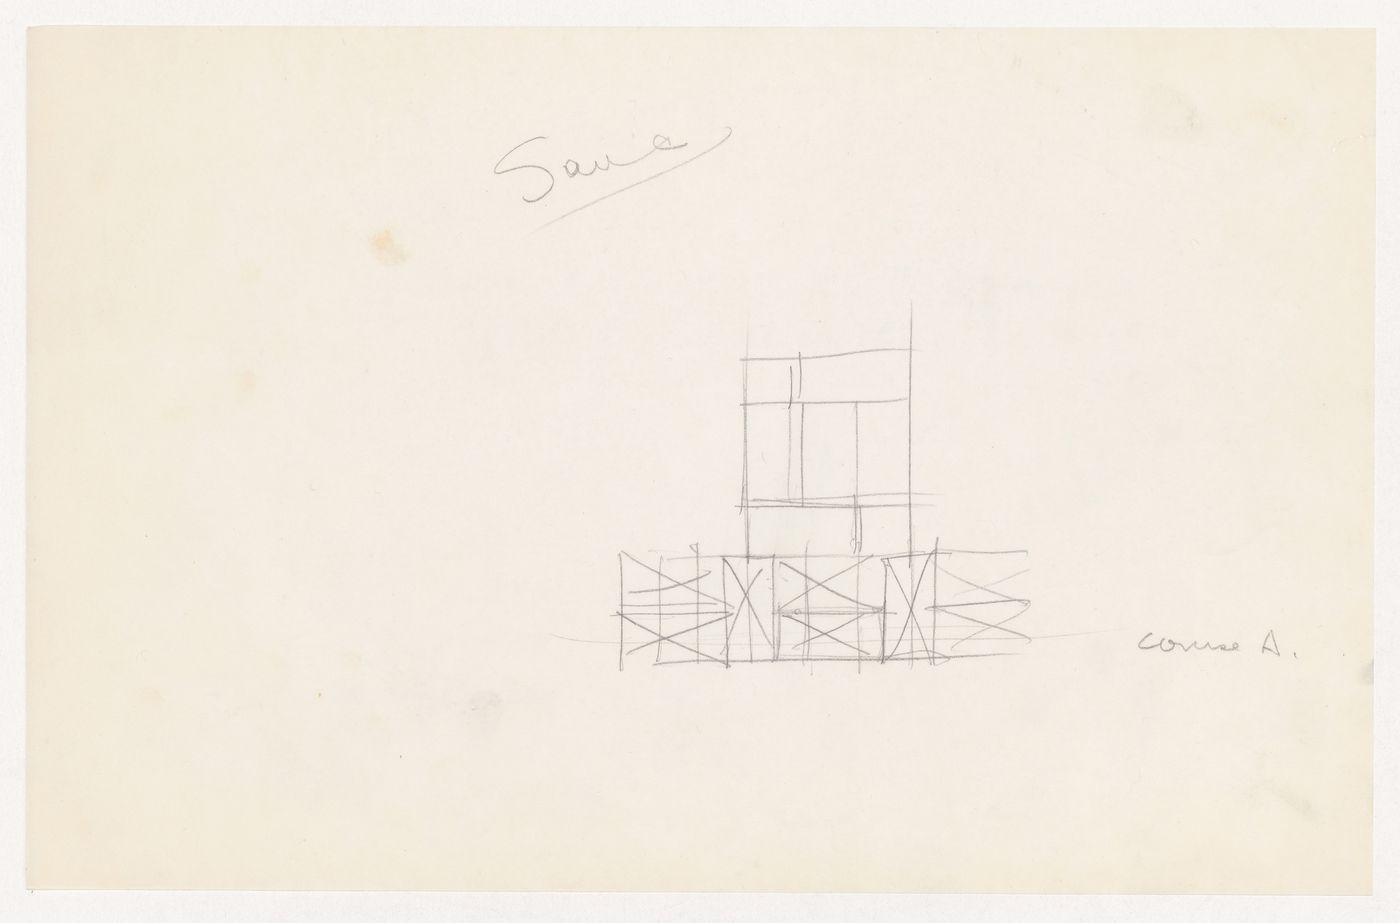 Sketch section for brick coursing for the Metallurgy Building, Illinois Institute of Technology, Chicago